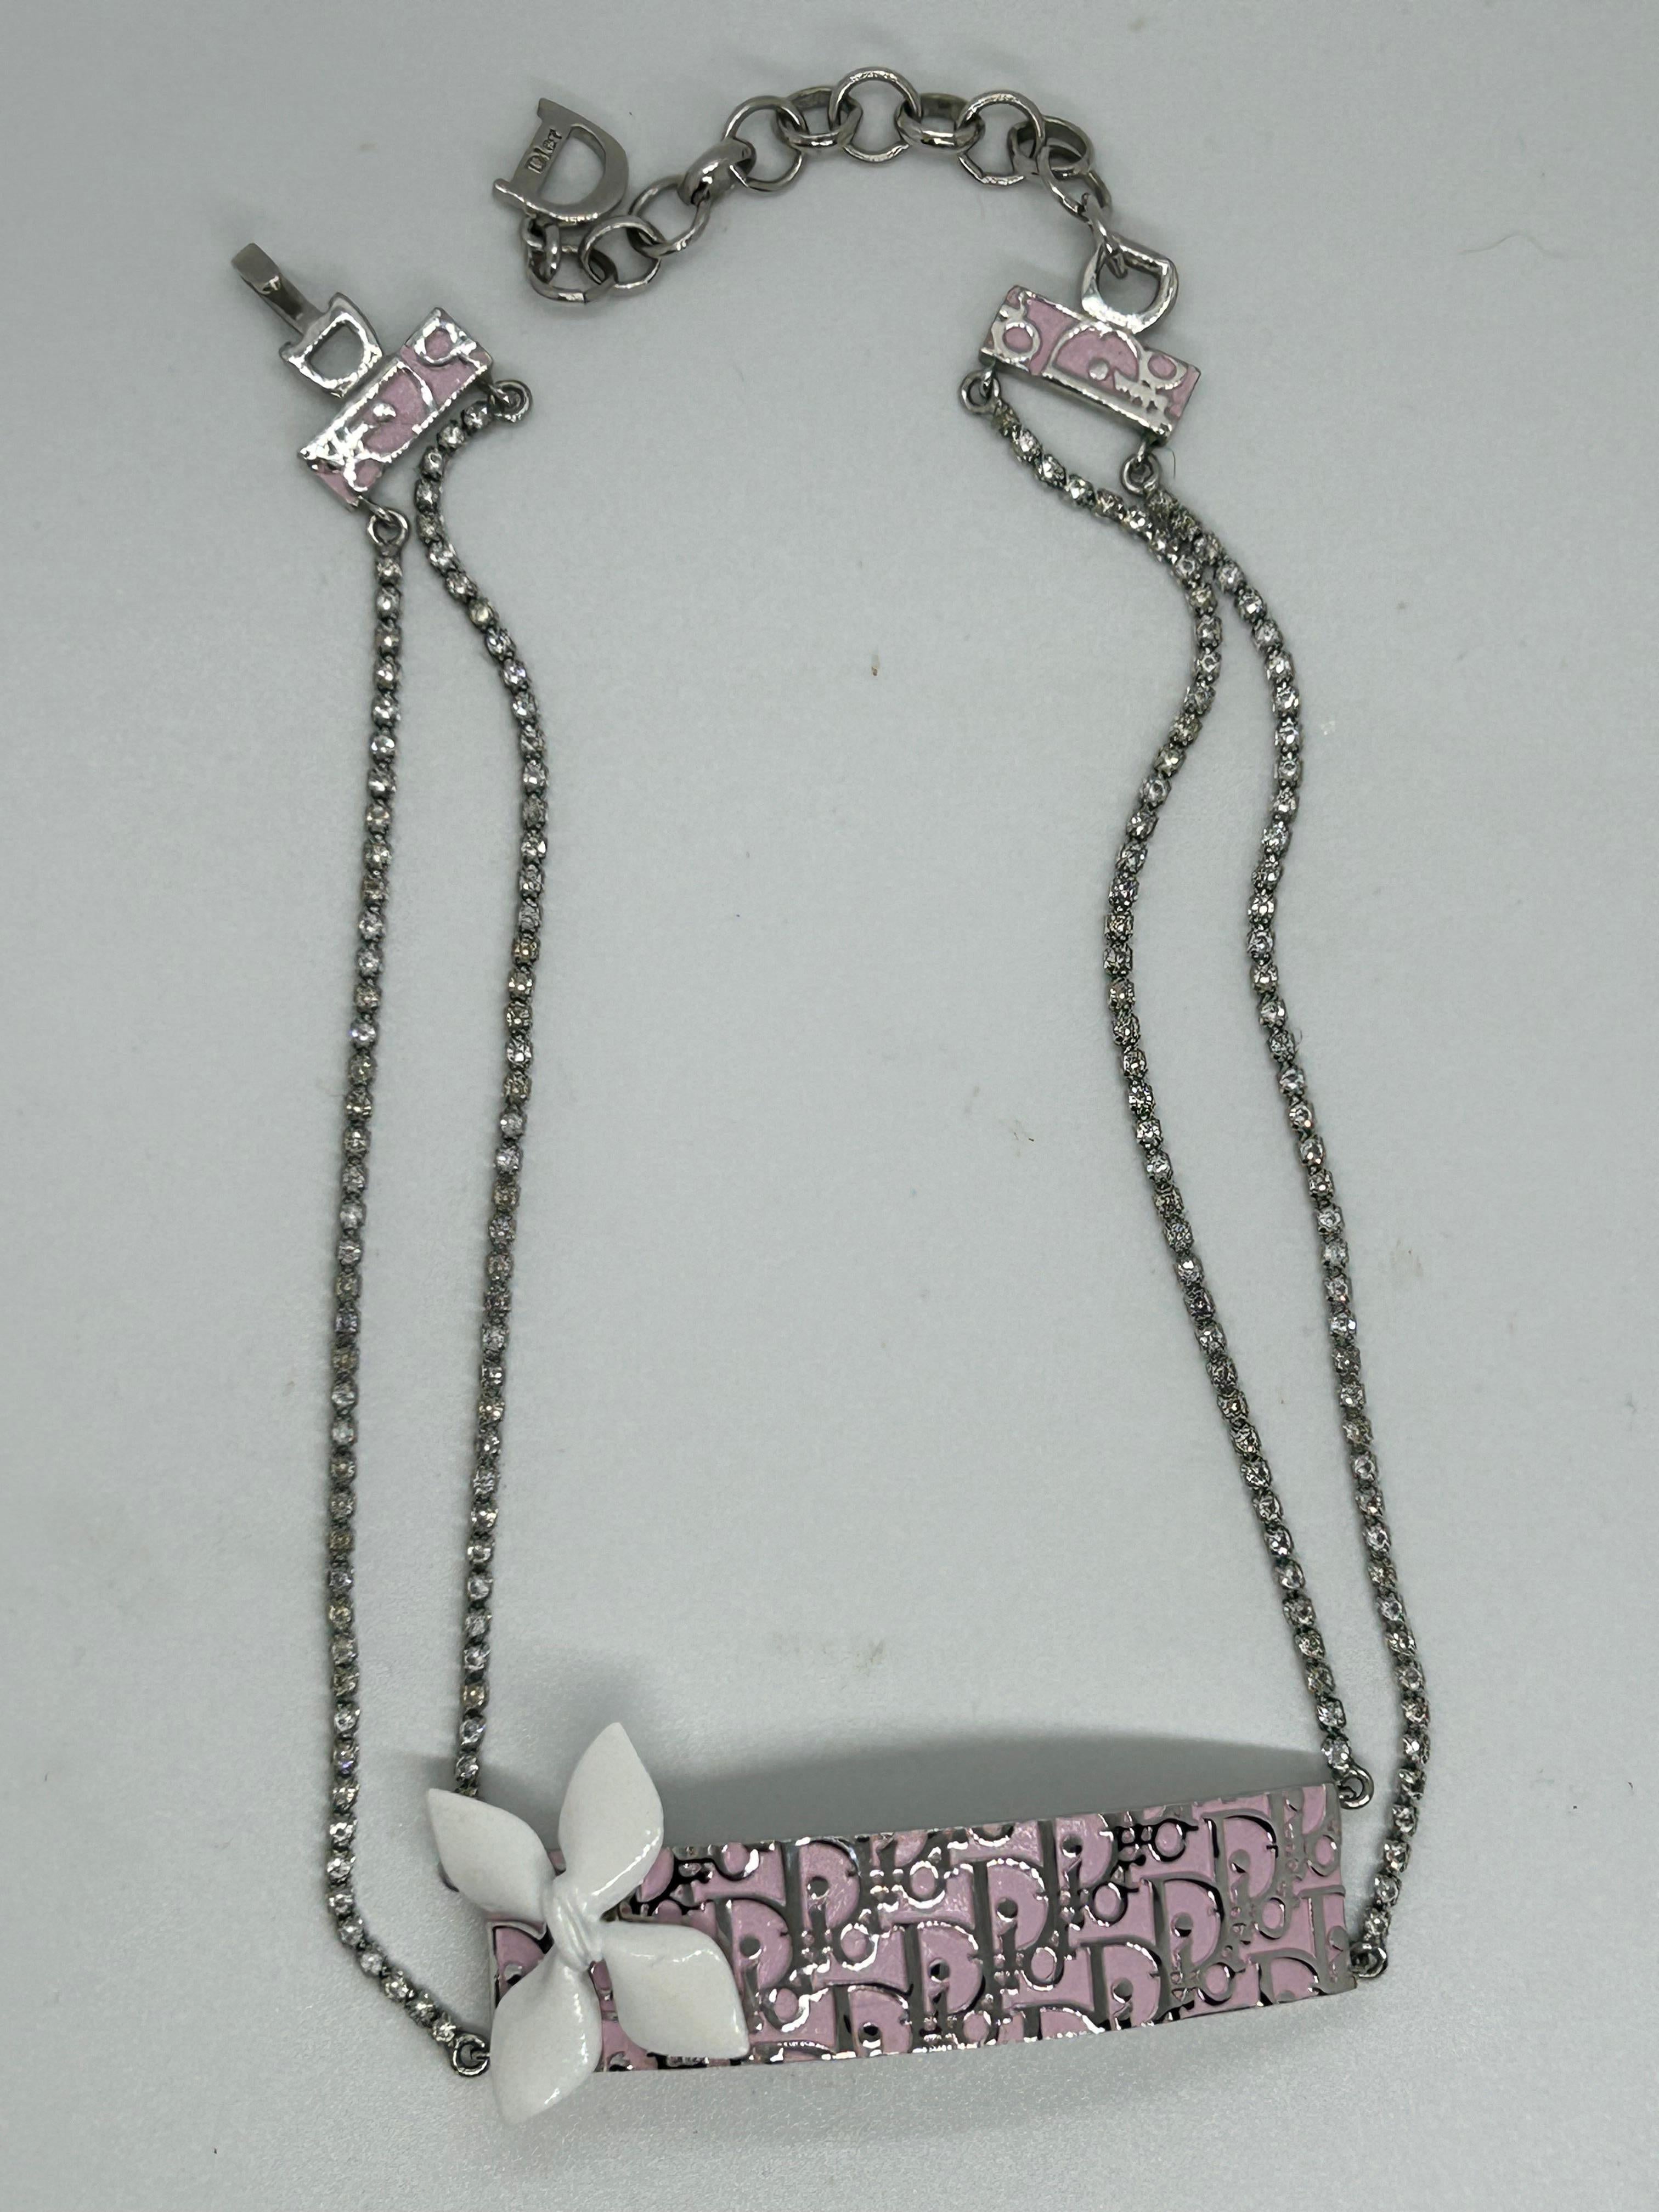 A Gorgeous pink logo trotter choker from Christian Dior.
This beautiful necklace is a real pretty piece.
Pink pastel background with silver Dior logo and a pretty white enamel petal on one corner .
Two chains with diamantés crystals and a hook